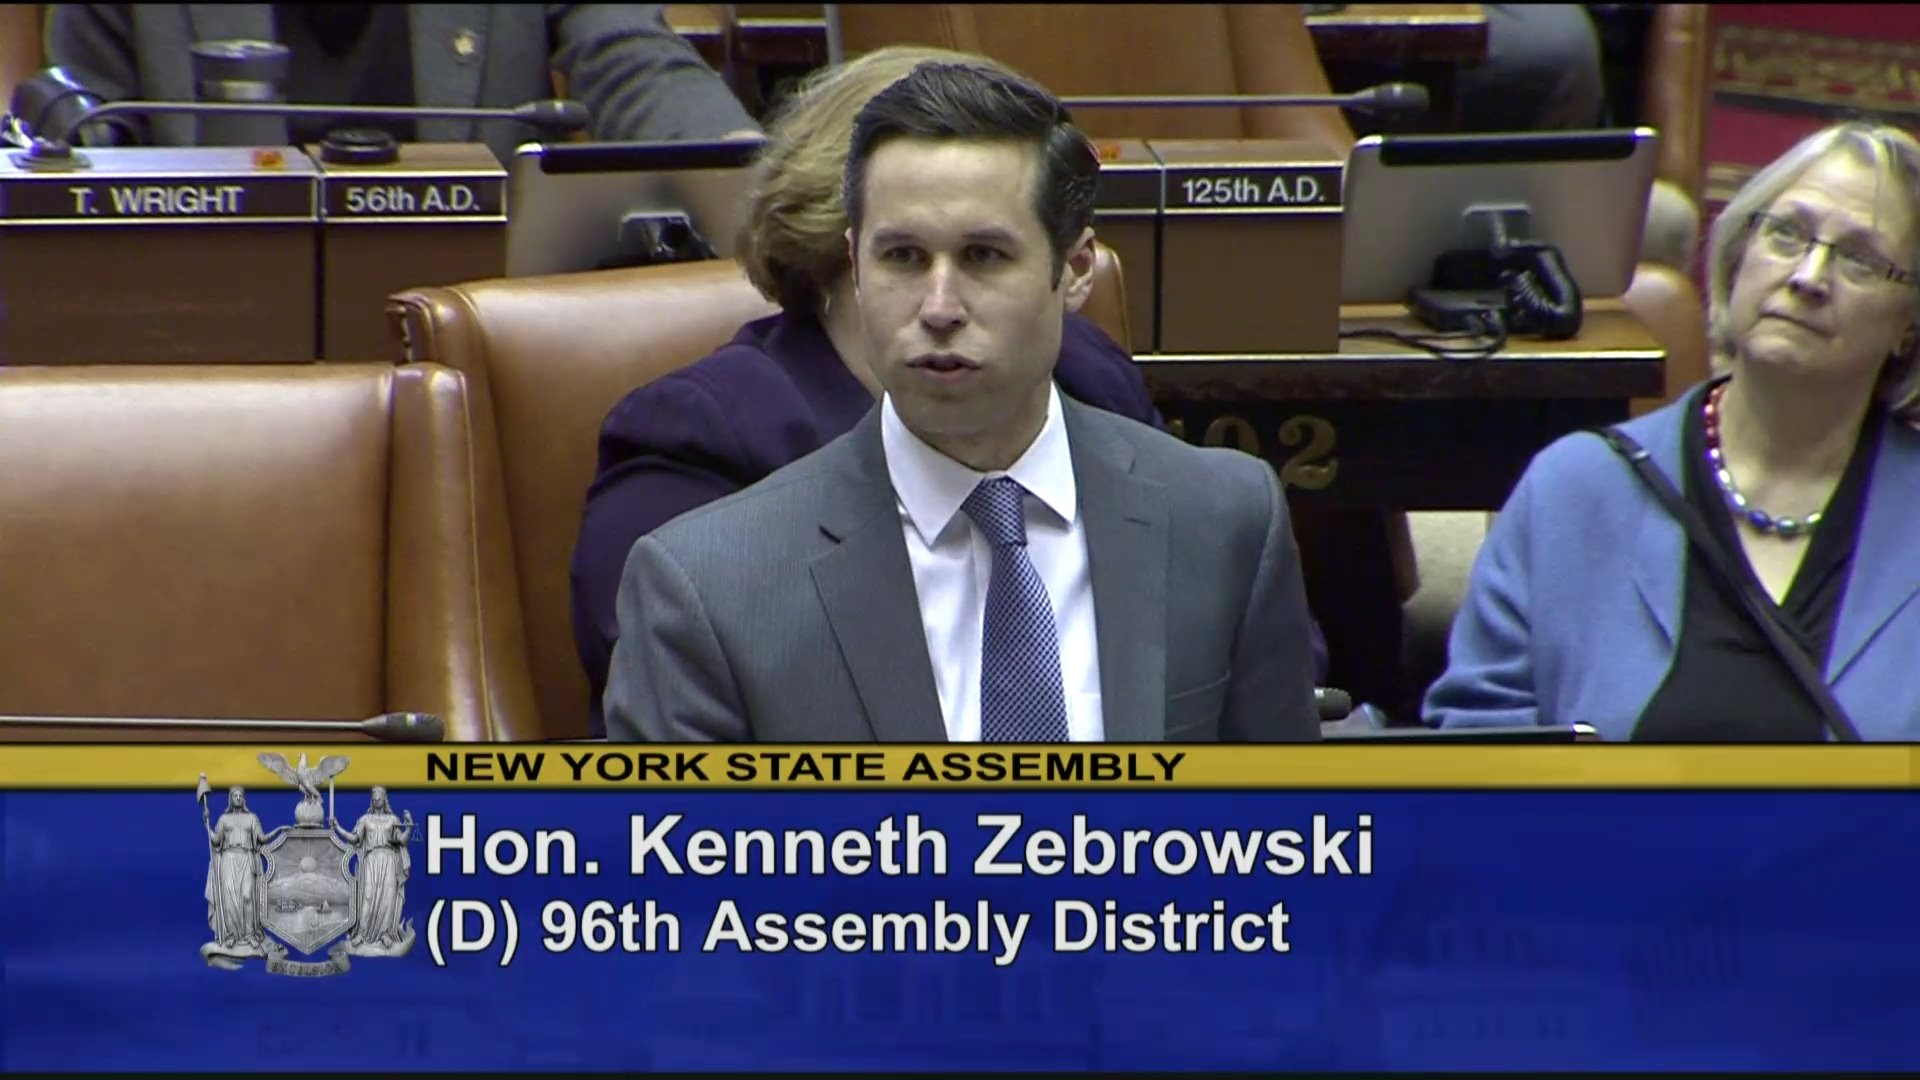 Zebrowski Introduces Rockland Cty Solid Waste Management Authority Members